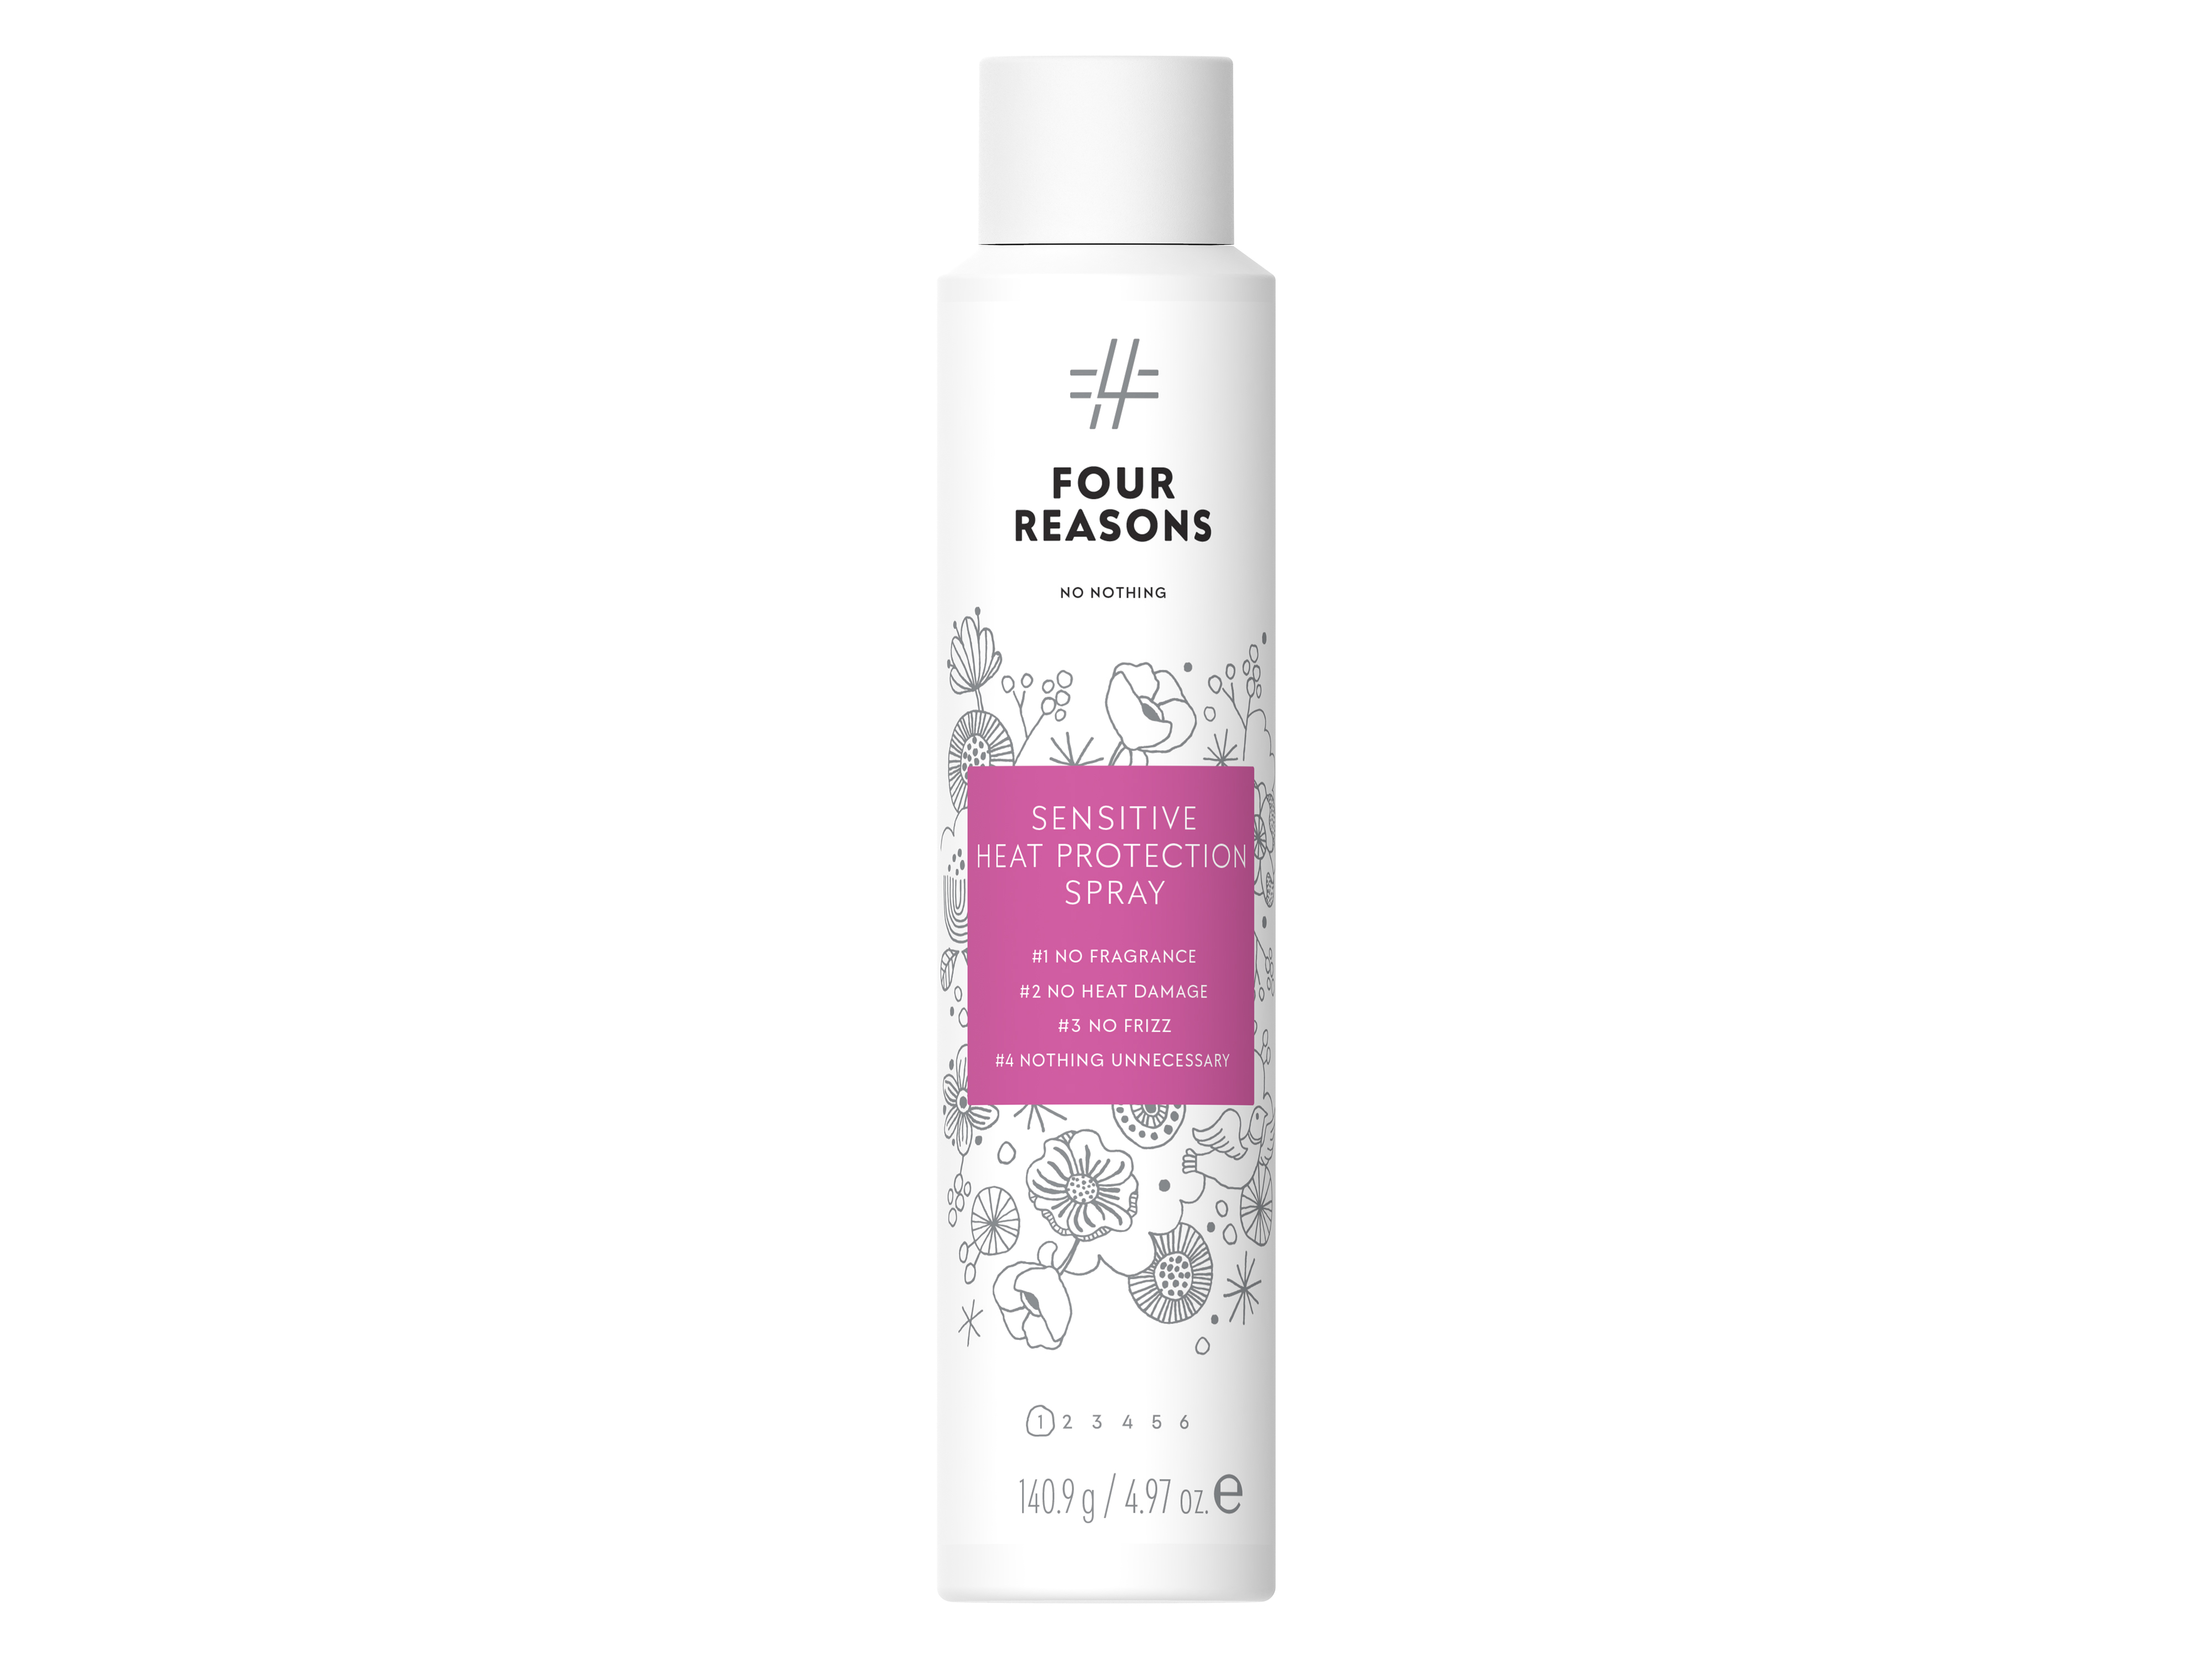 Four Reasons No Nothing Sensitive Heat Protection Spray, 200 ml